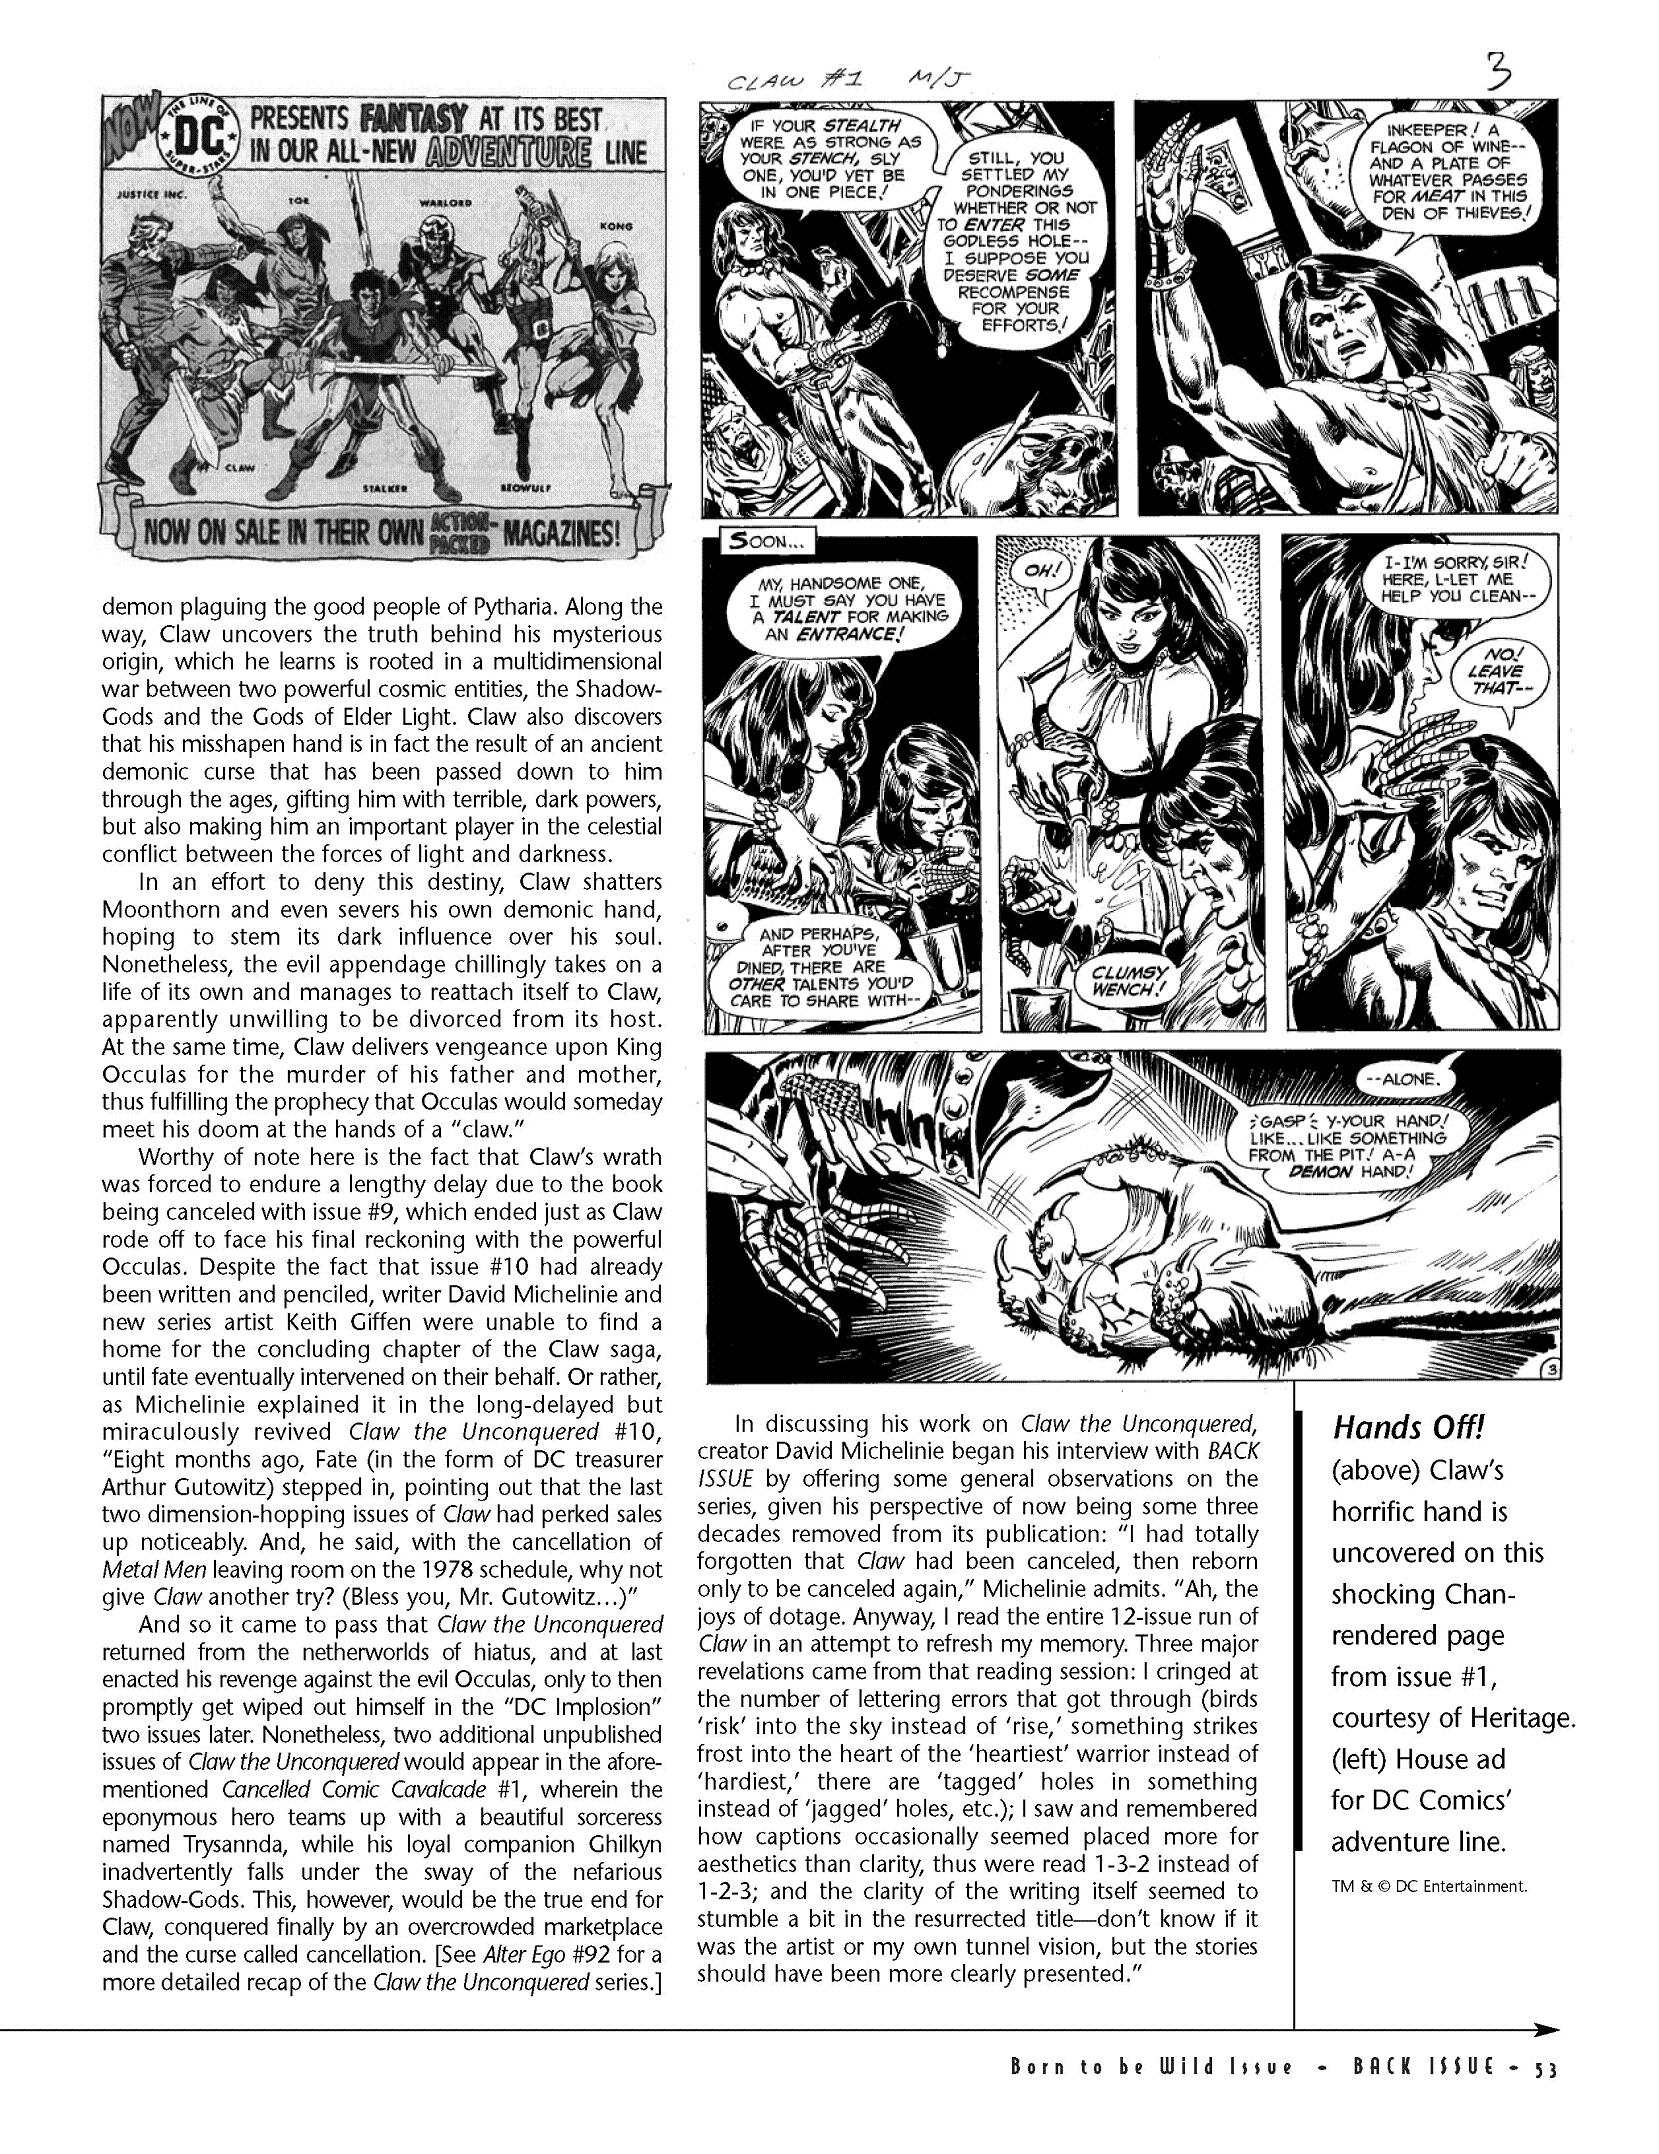 Read online Back Issue comic -  Issue #43 - 54